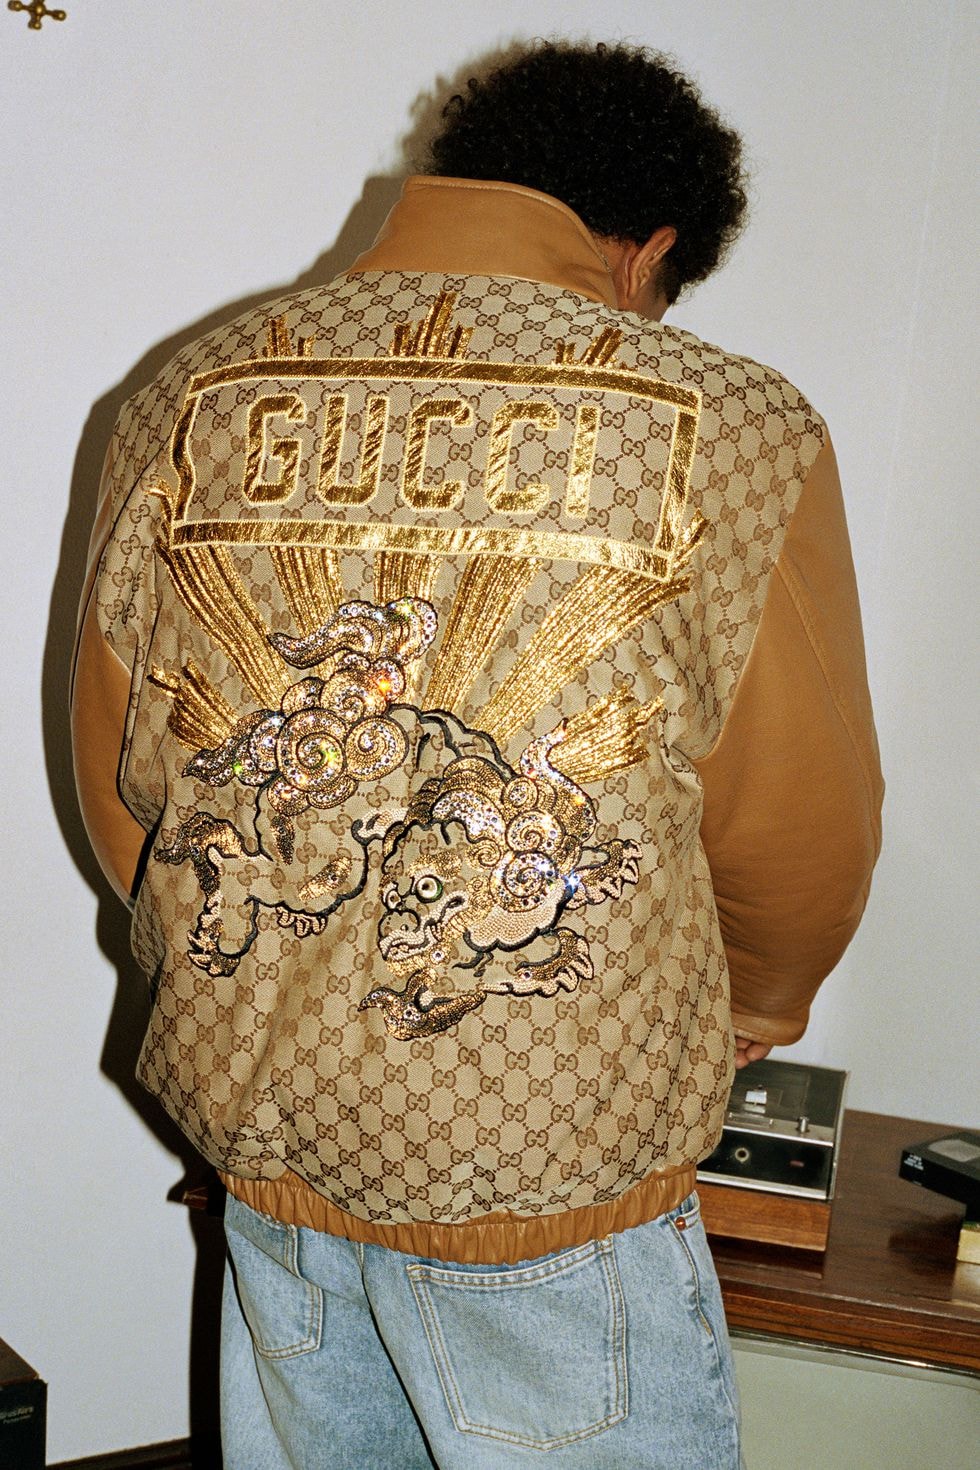 gucci dapper dan collection old school hiphop 80's trend